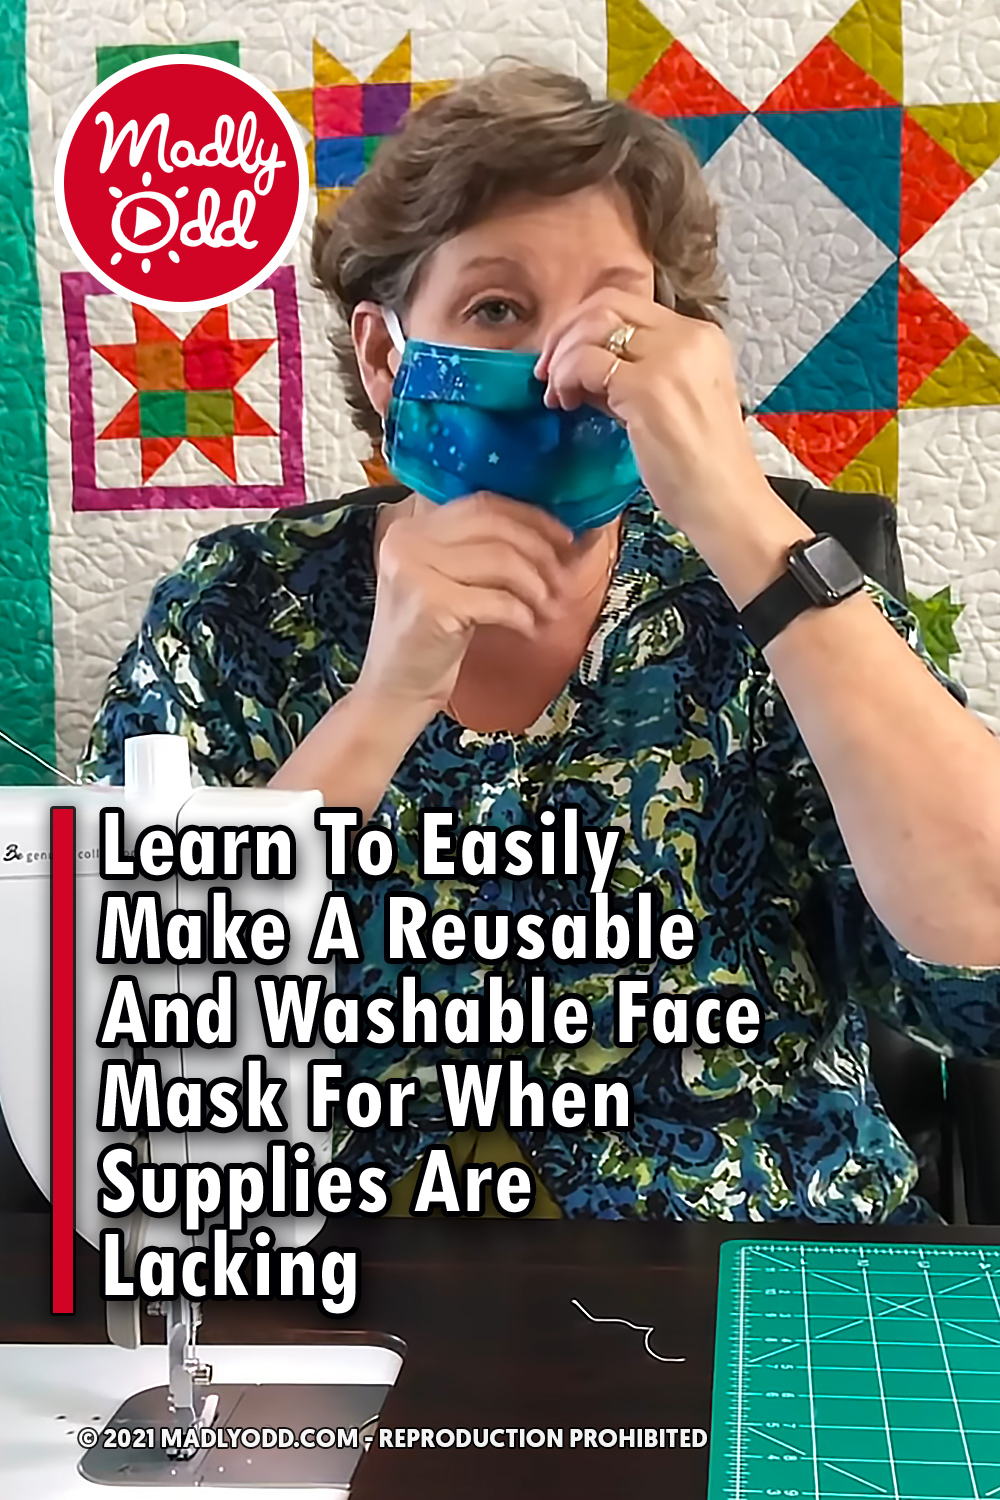 Learn To Easily Make A Reusable And Washable Face Mask For When Supplies Are Lacking